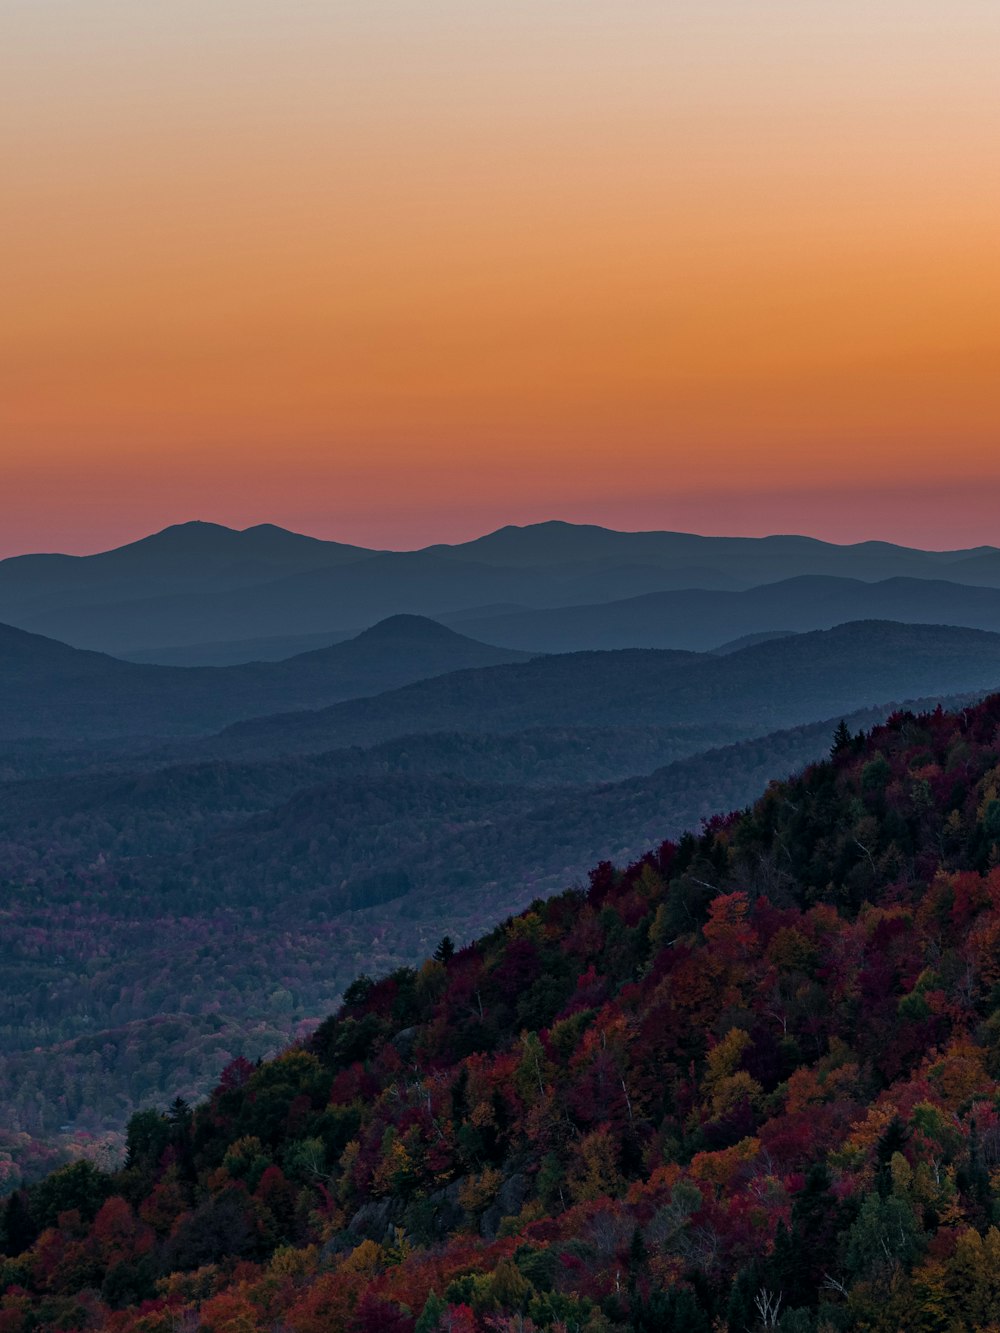 the sun is setting over the mountains in the fall